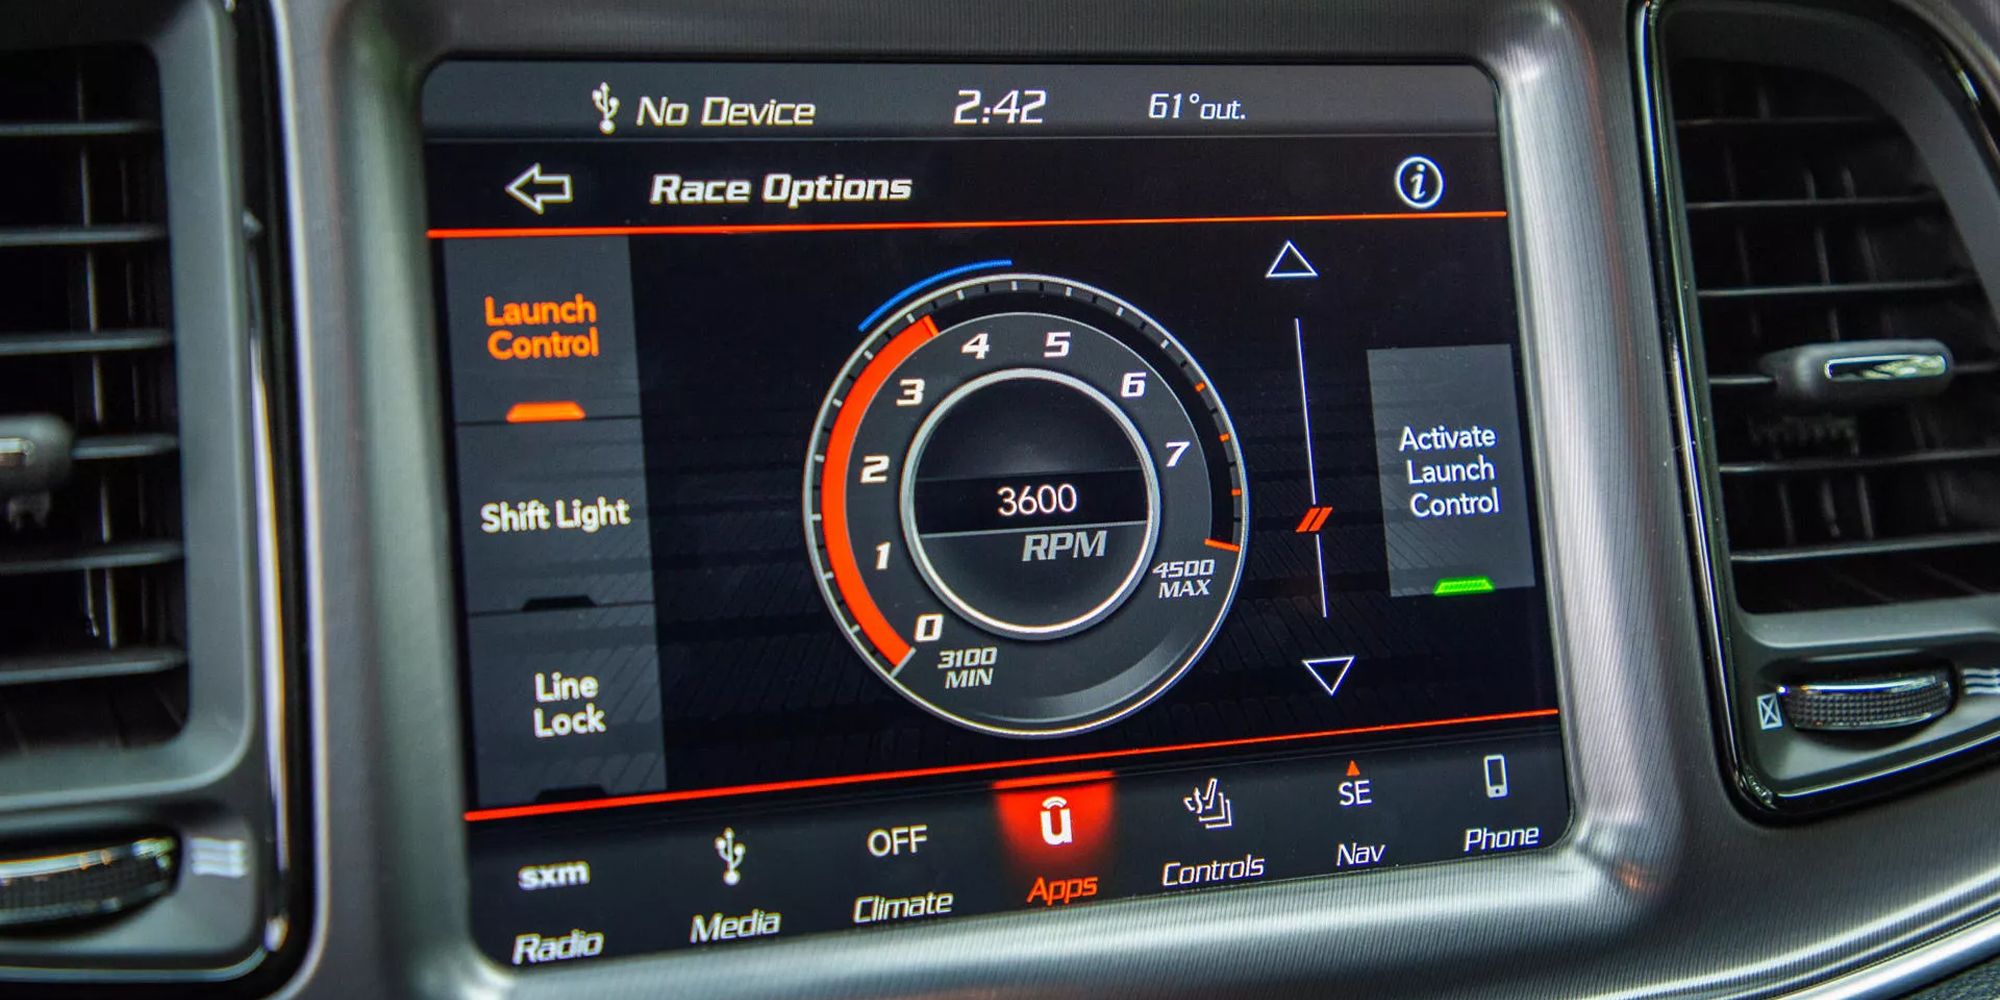 The launch control rev limiter settings in Track Apps